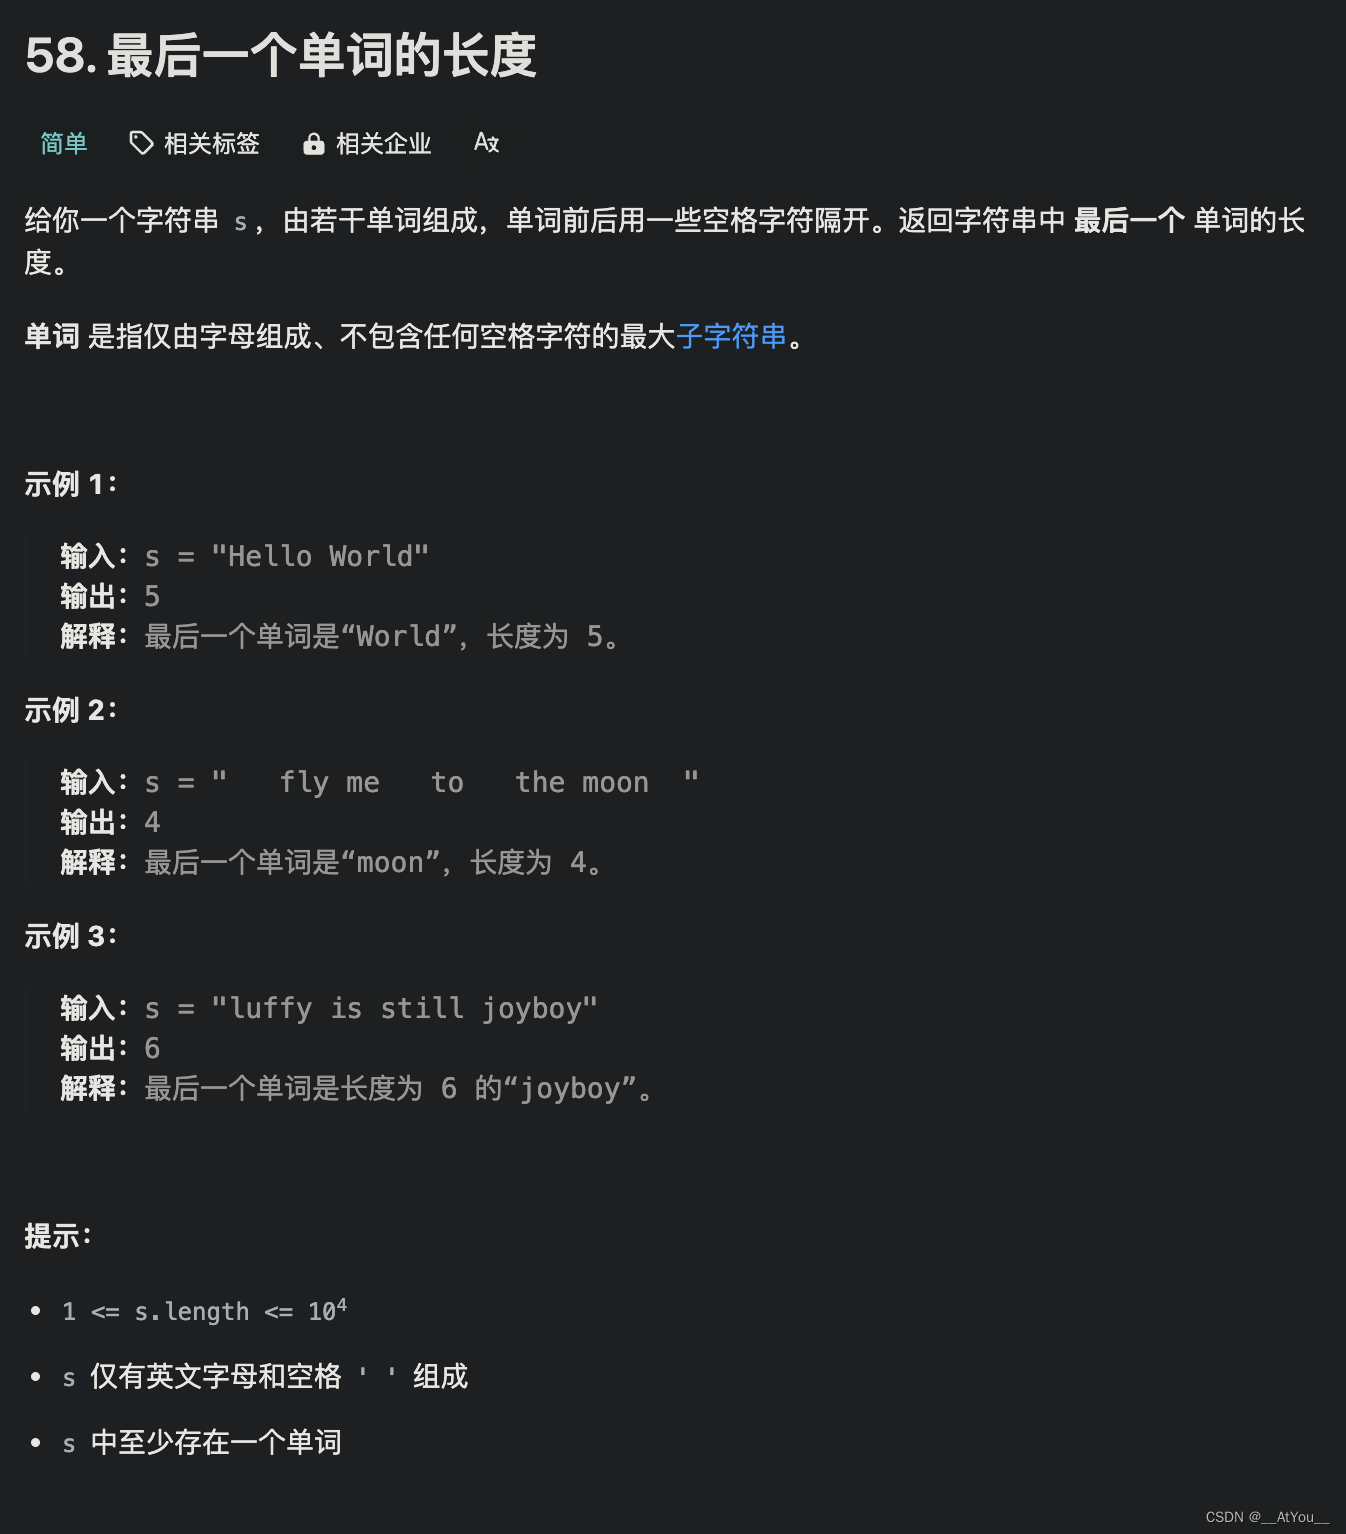 Golang | <span style='color:red;'>Leetcode</span> Golang题解之<span style='color:red;'>第</span><span style='color:red;'>58</span><span style='color:red;'>题</span><span style='color:red;'>最后</span><span style='color:red;'>一个</span><span style='color:red;'>单词</span><span style='color:red;'>的</span><span style='color:red;'>长度</span>